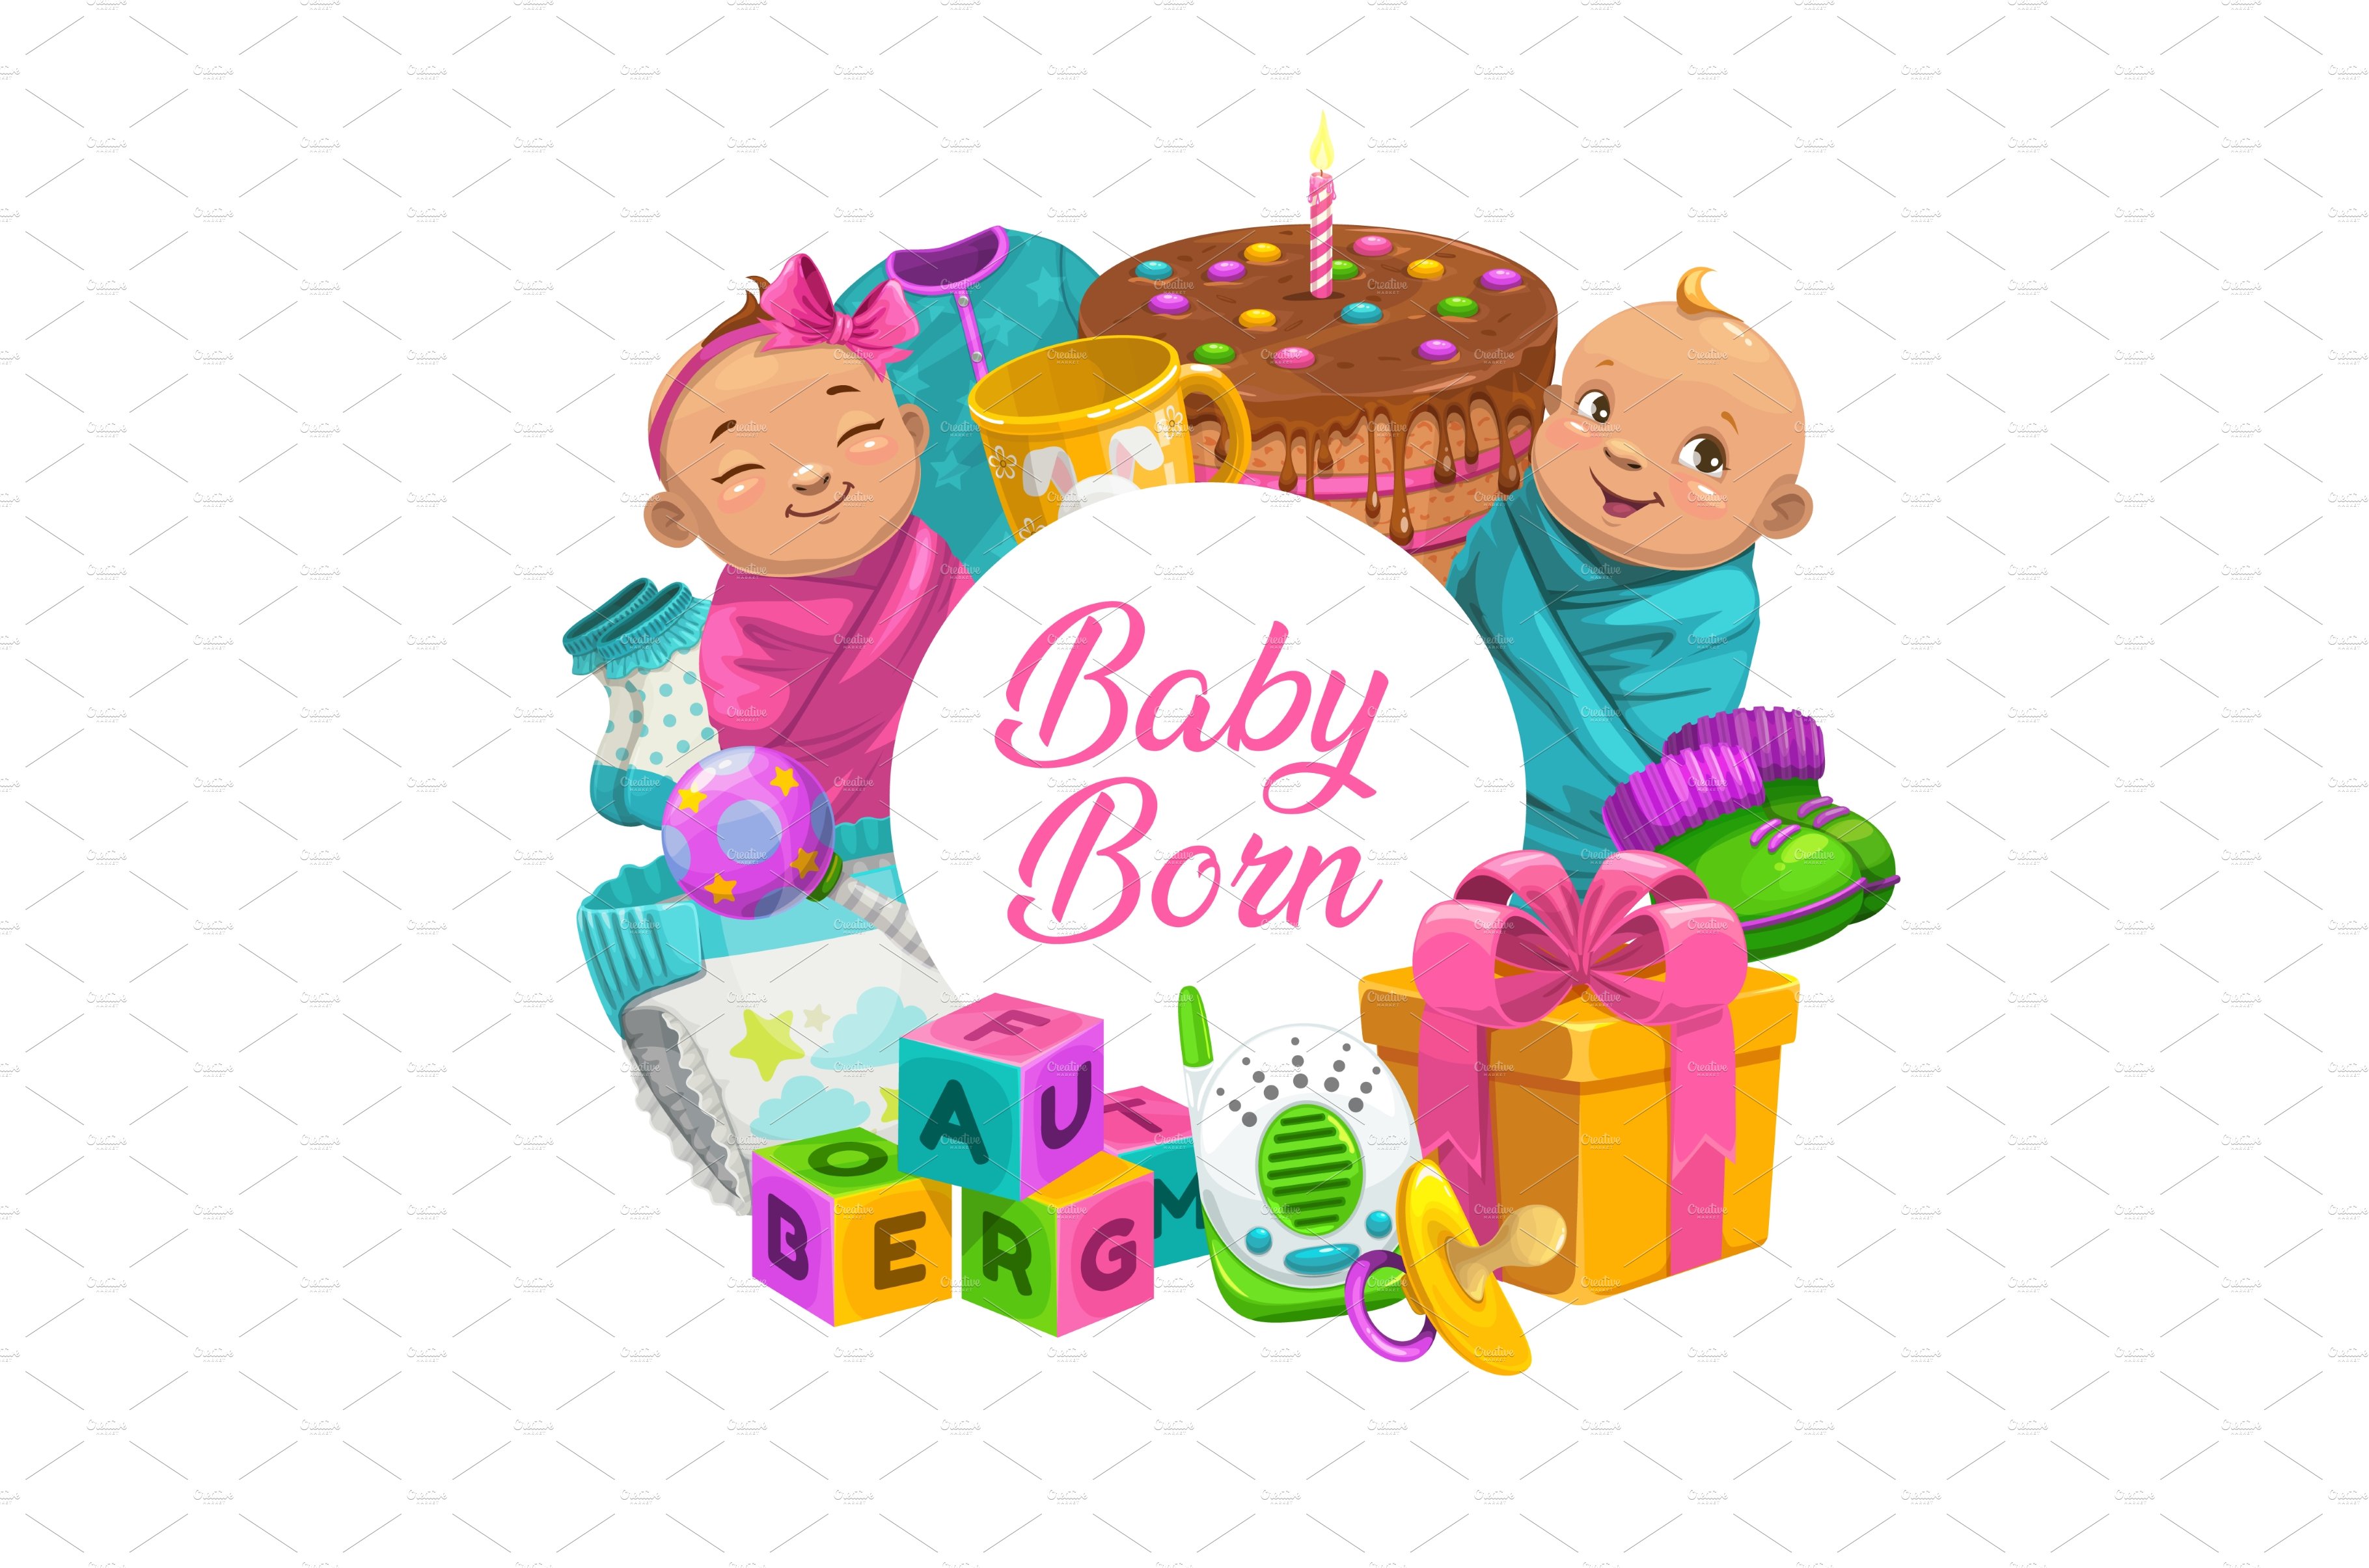 Baby care, children toys frame cover image.